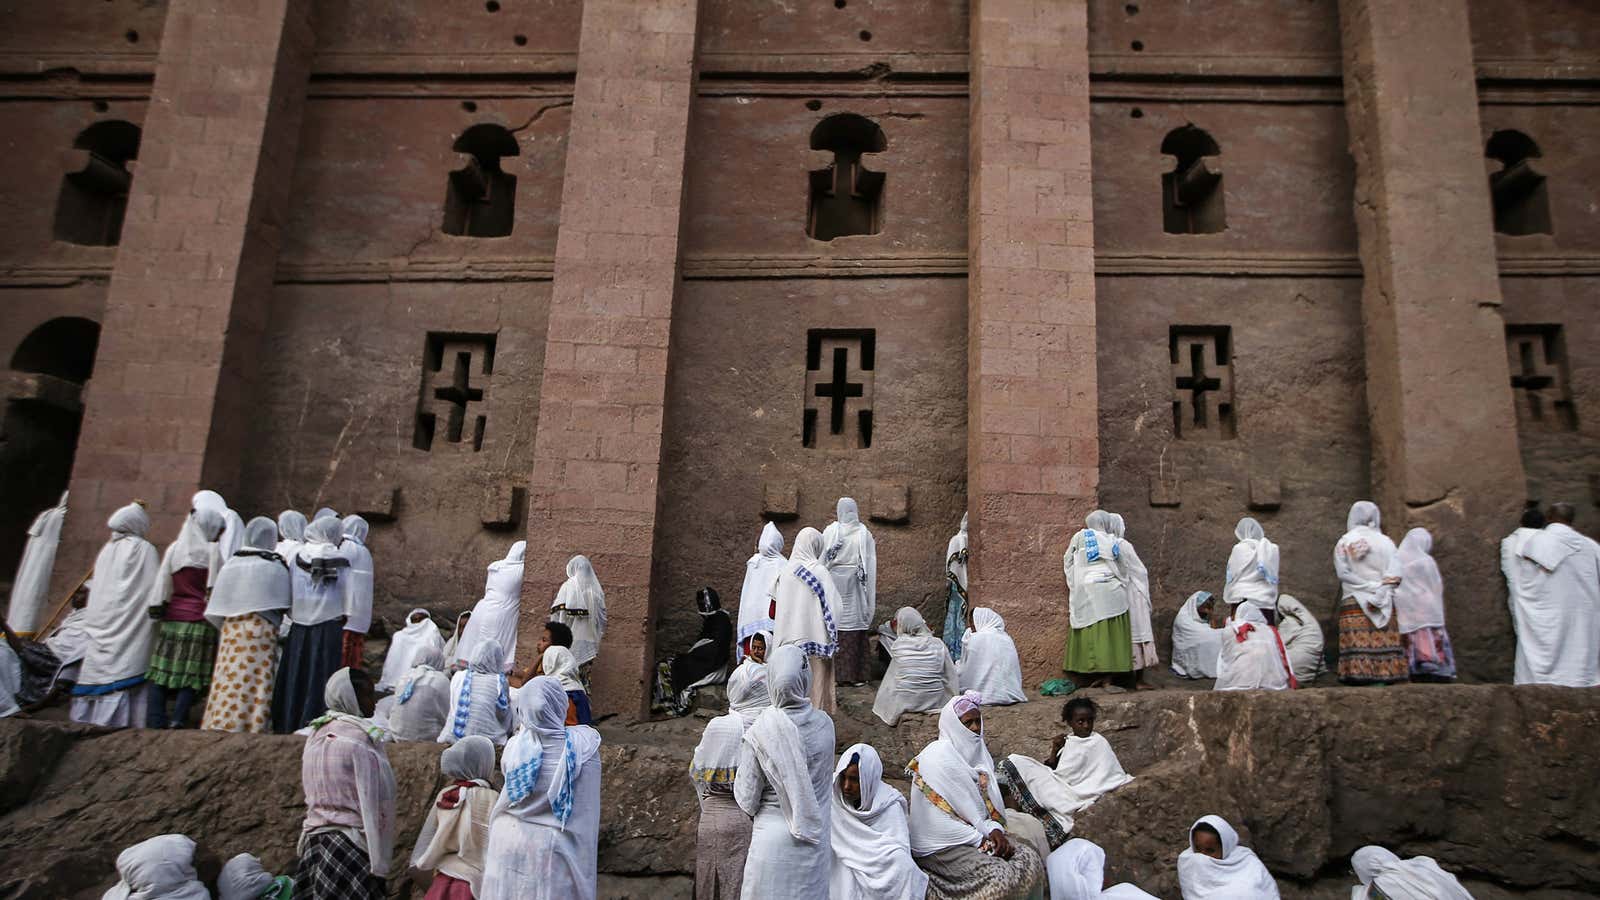 The rock-hewn churches in Lalibela are a major tourist attraction in Ethiopia.